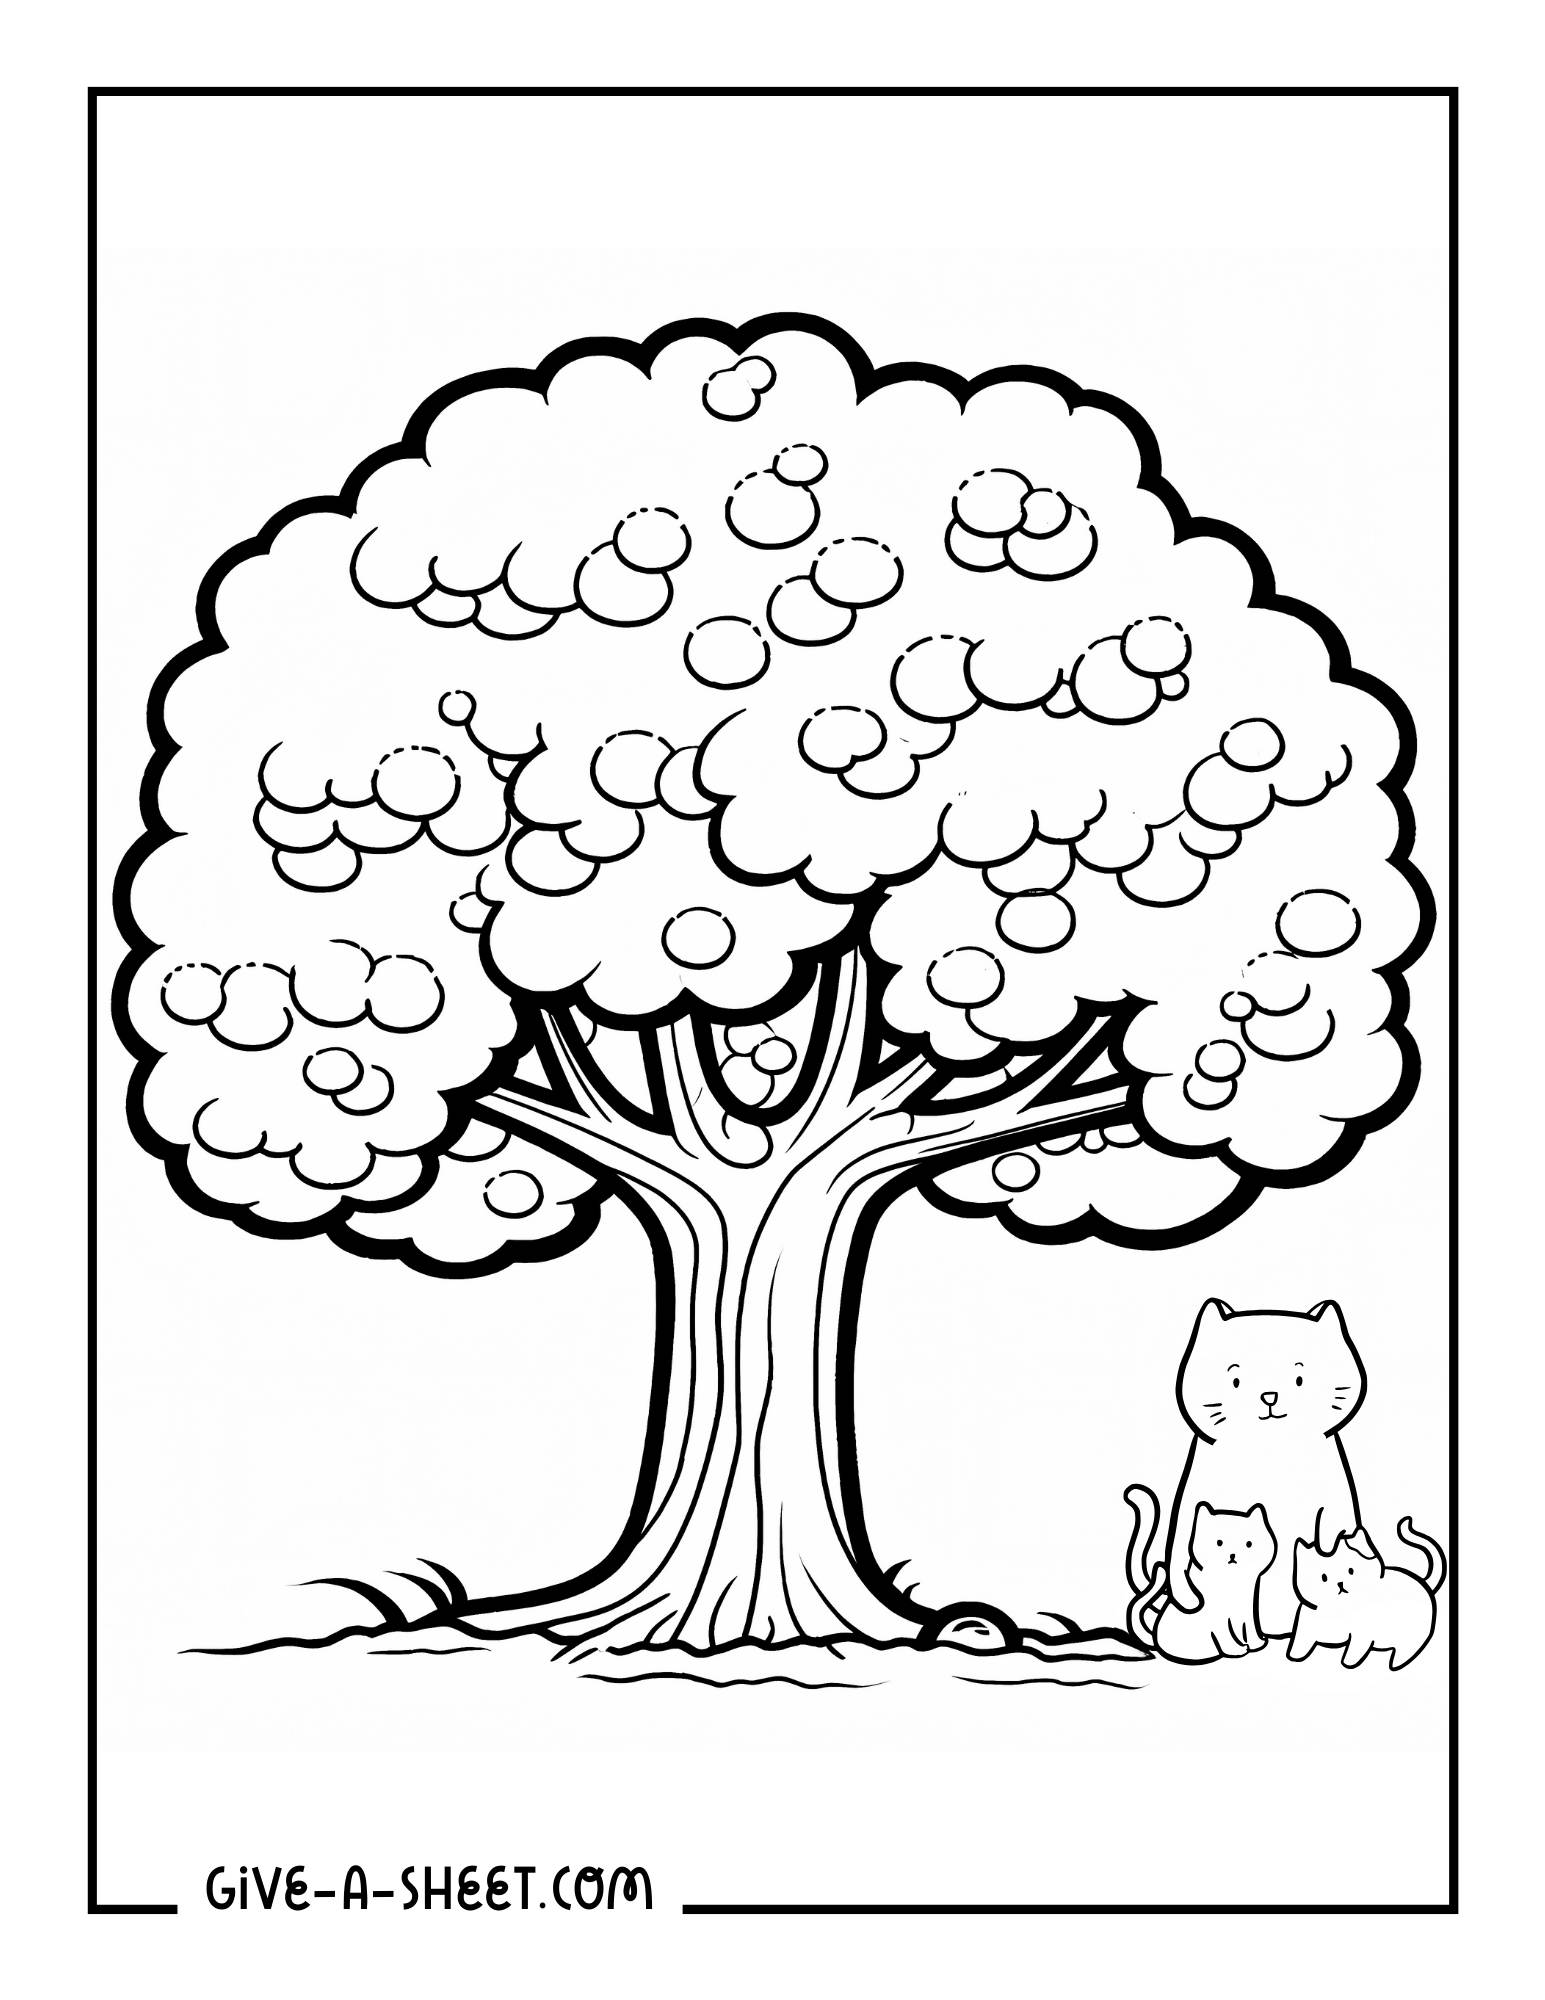 Fruit bearing species of trees coloring page.